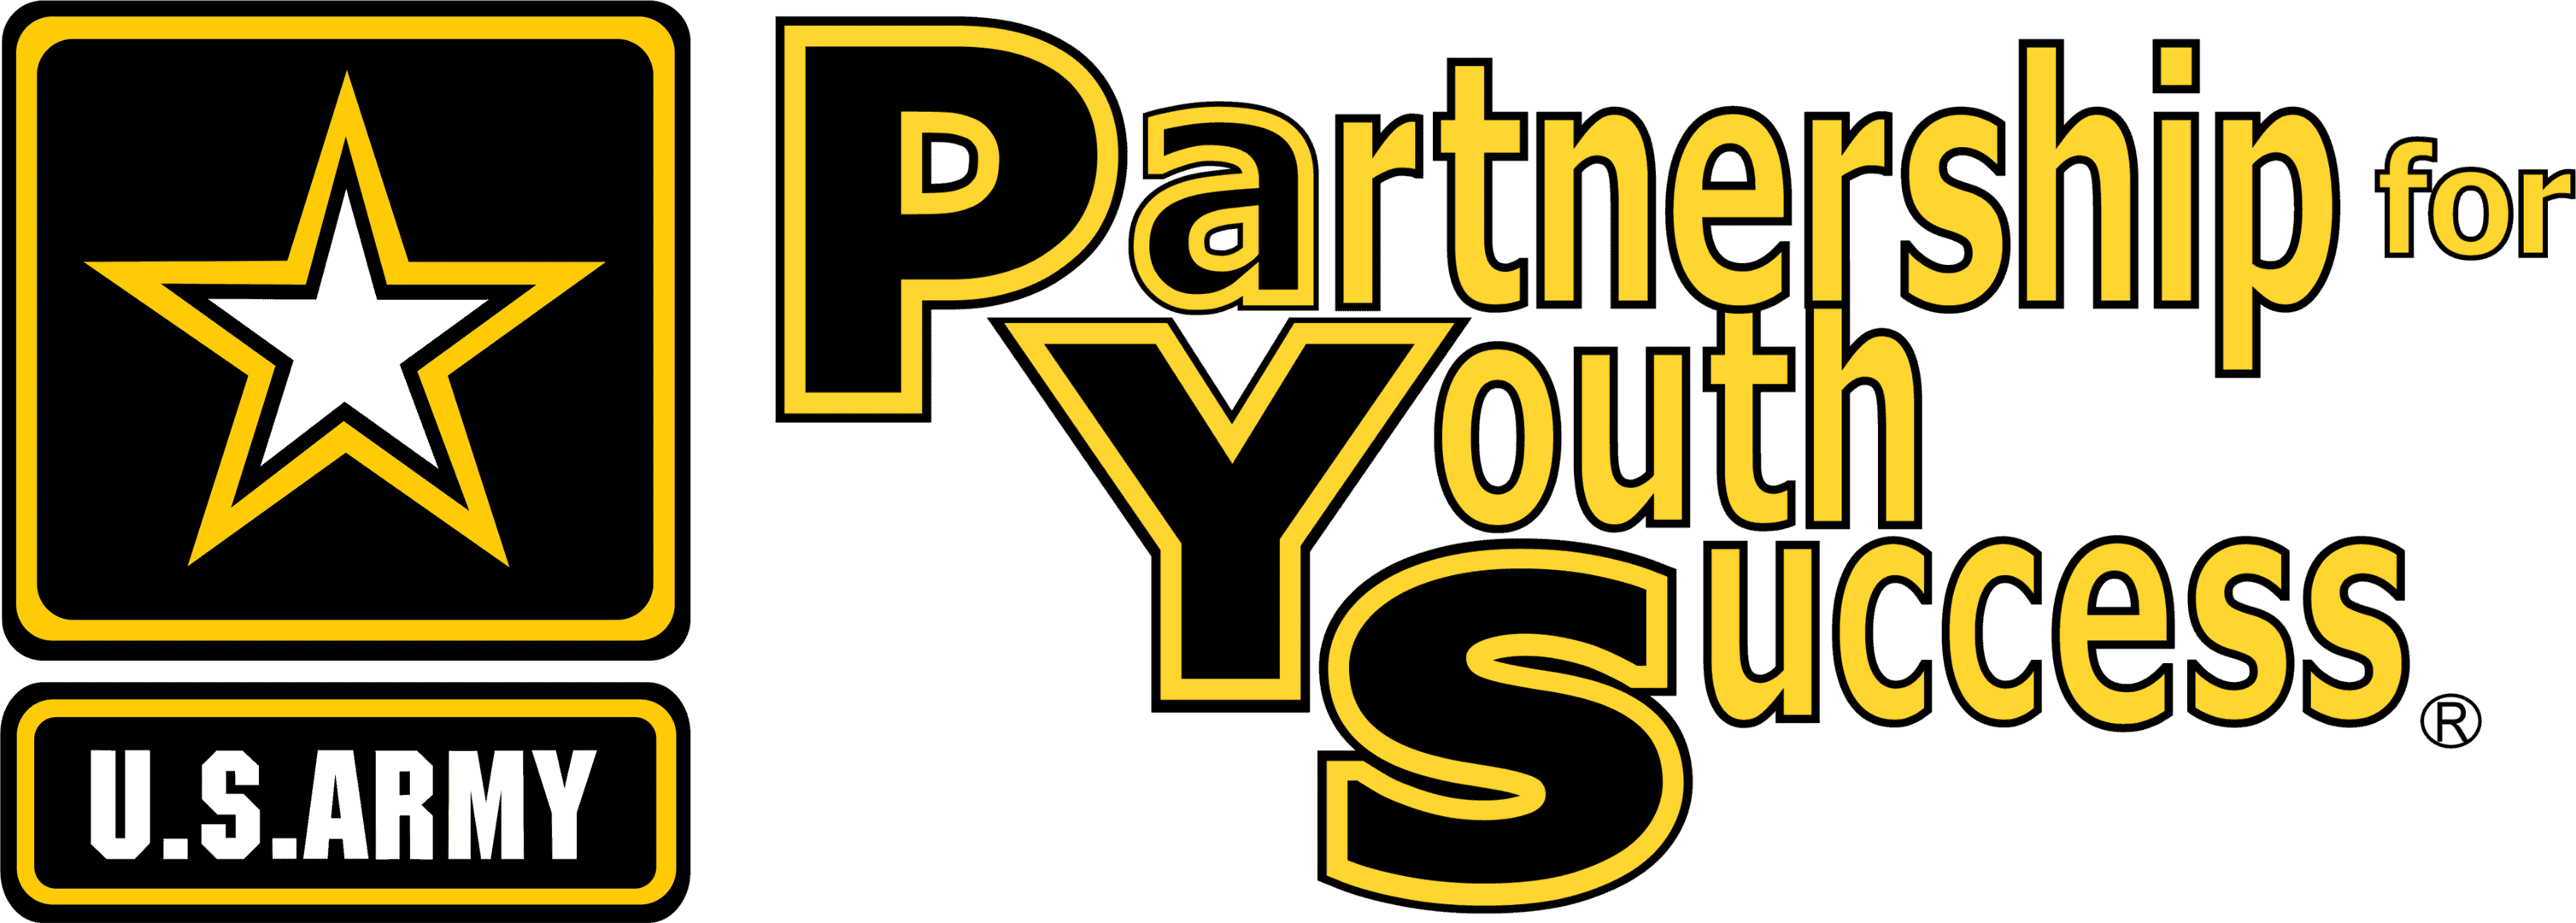 US Army Partnership for Youth Success